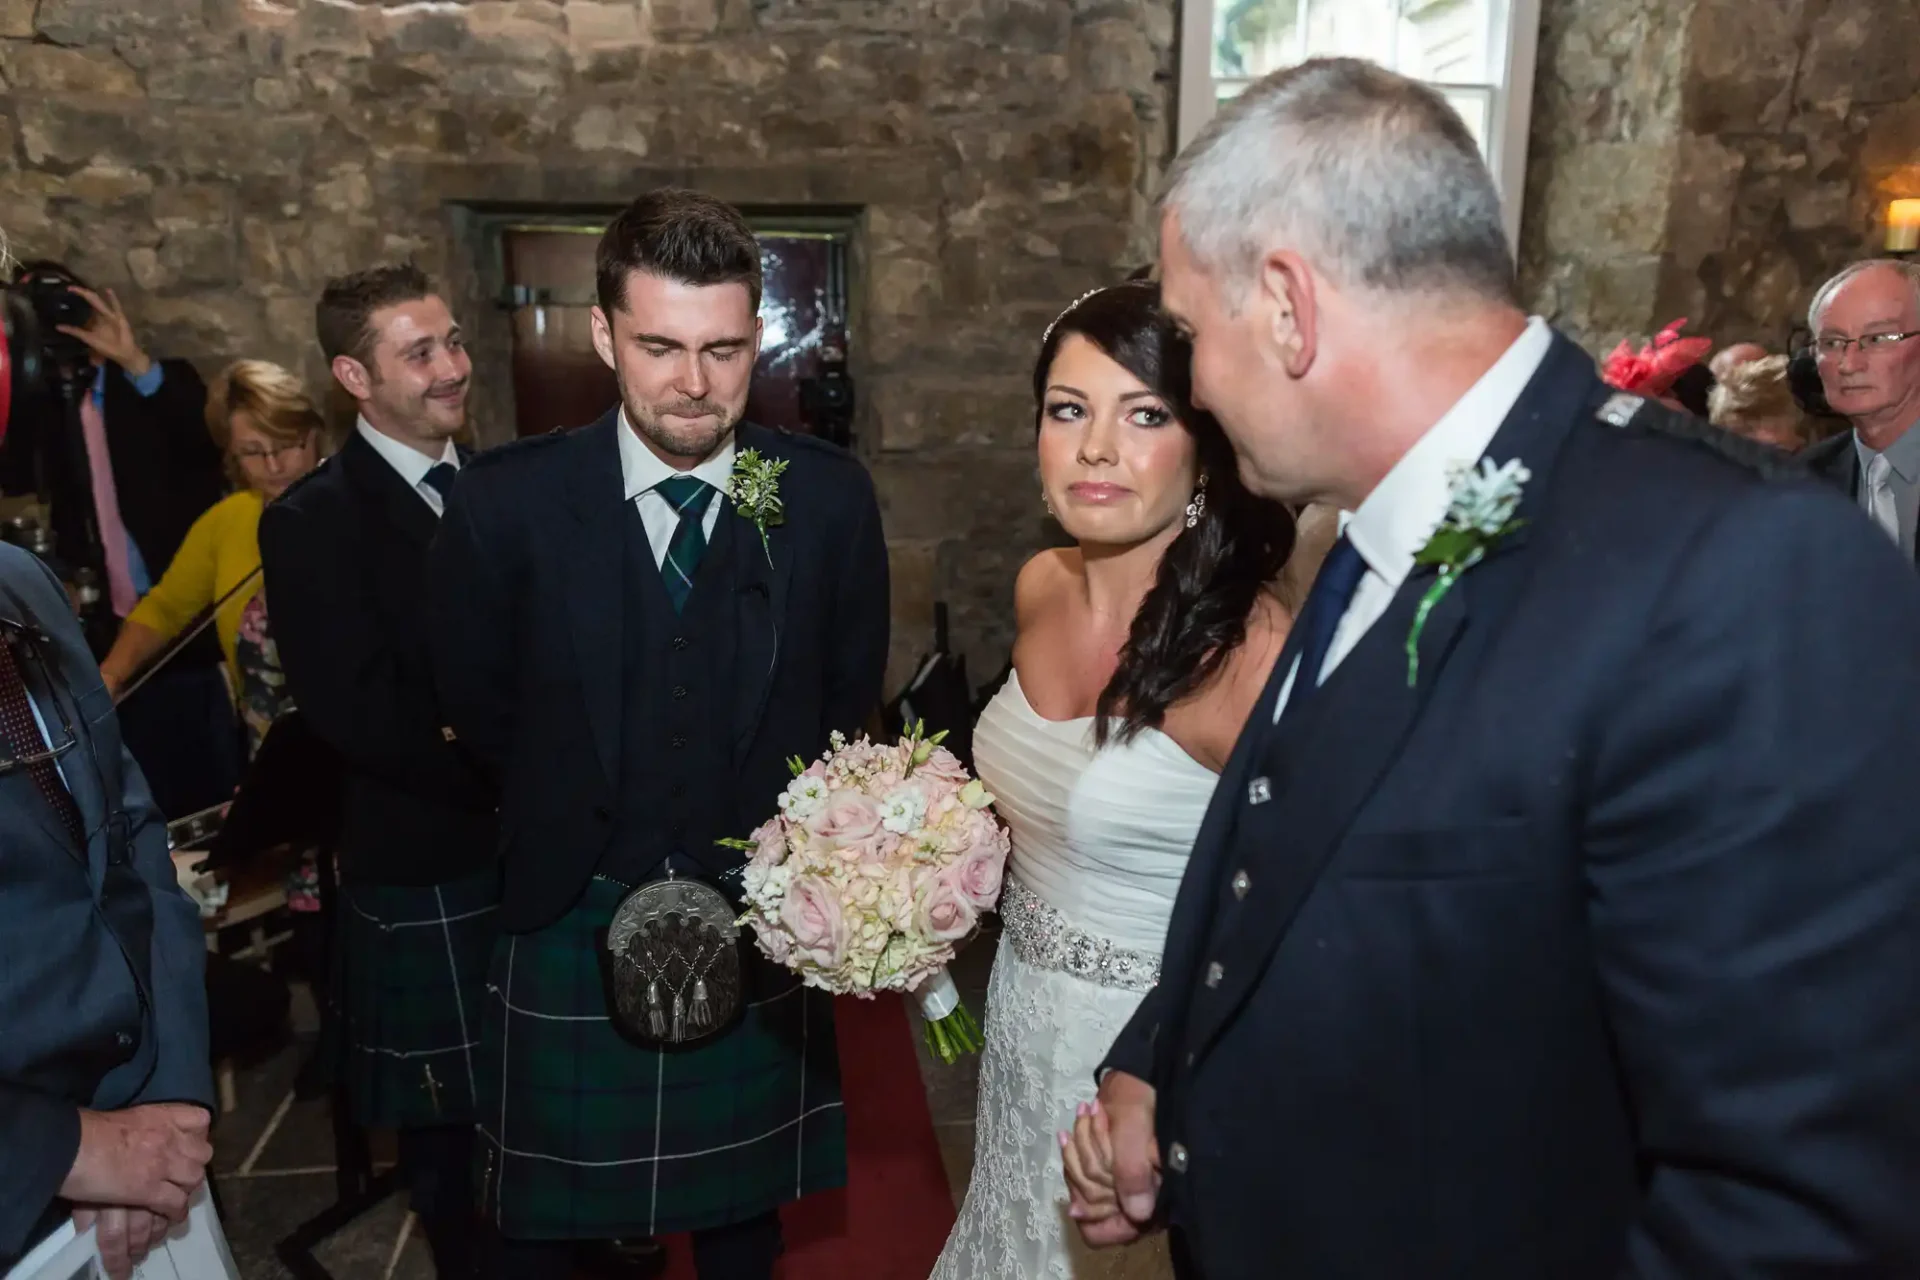 A bride and groom in a stone-walled room at a wedding ceremony, the groom in a tartan kilt and the bride holding a floral bouquet, facing a man on the right.